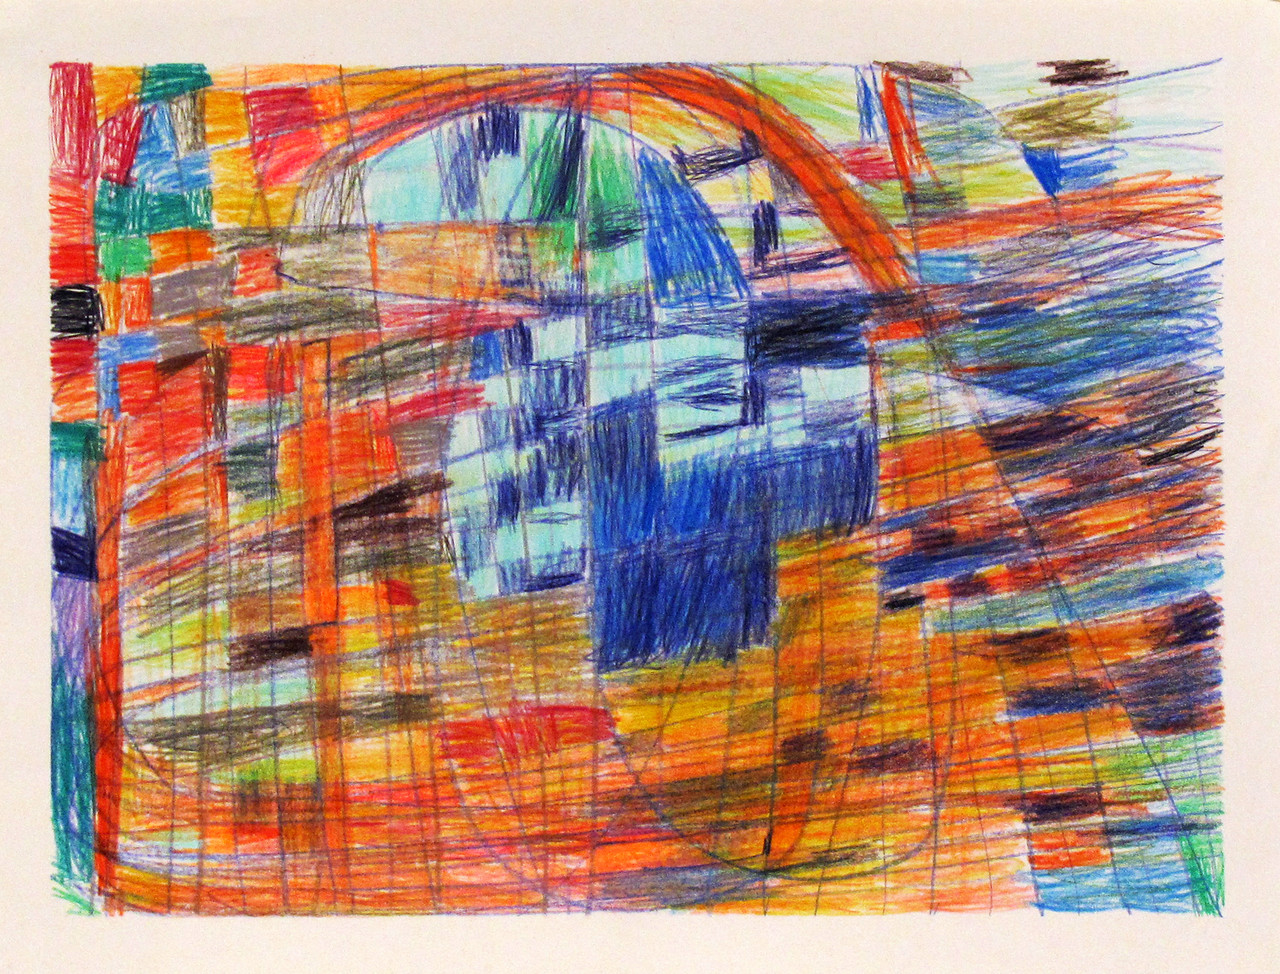 Untitled, 1988, Colored pencil and graphite on paper, 38.7 x 47 cm, BS 012